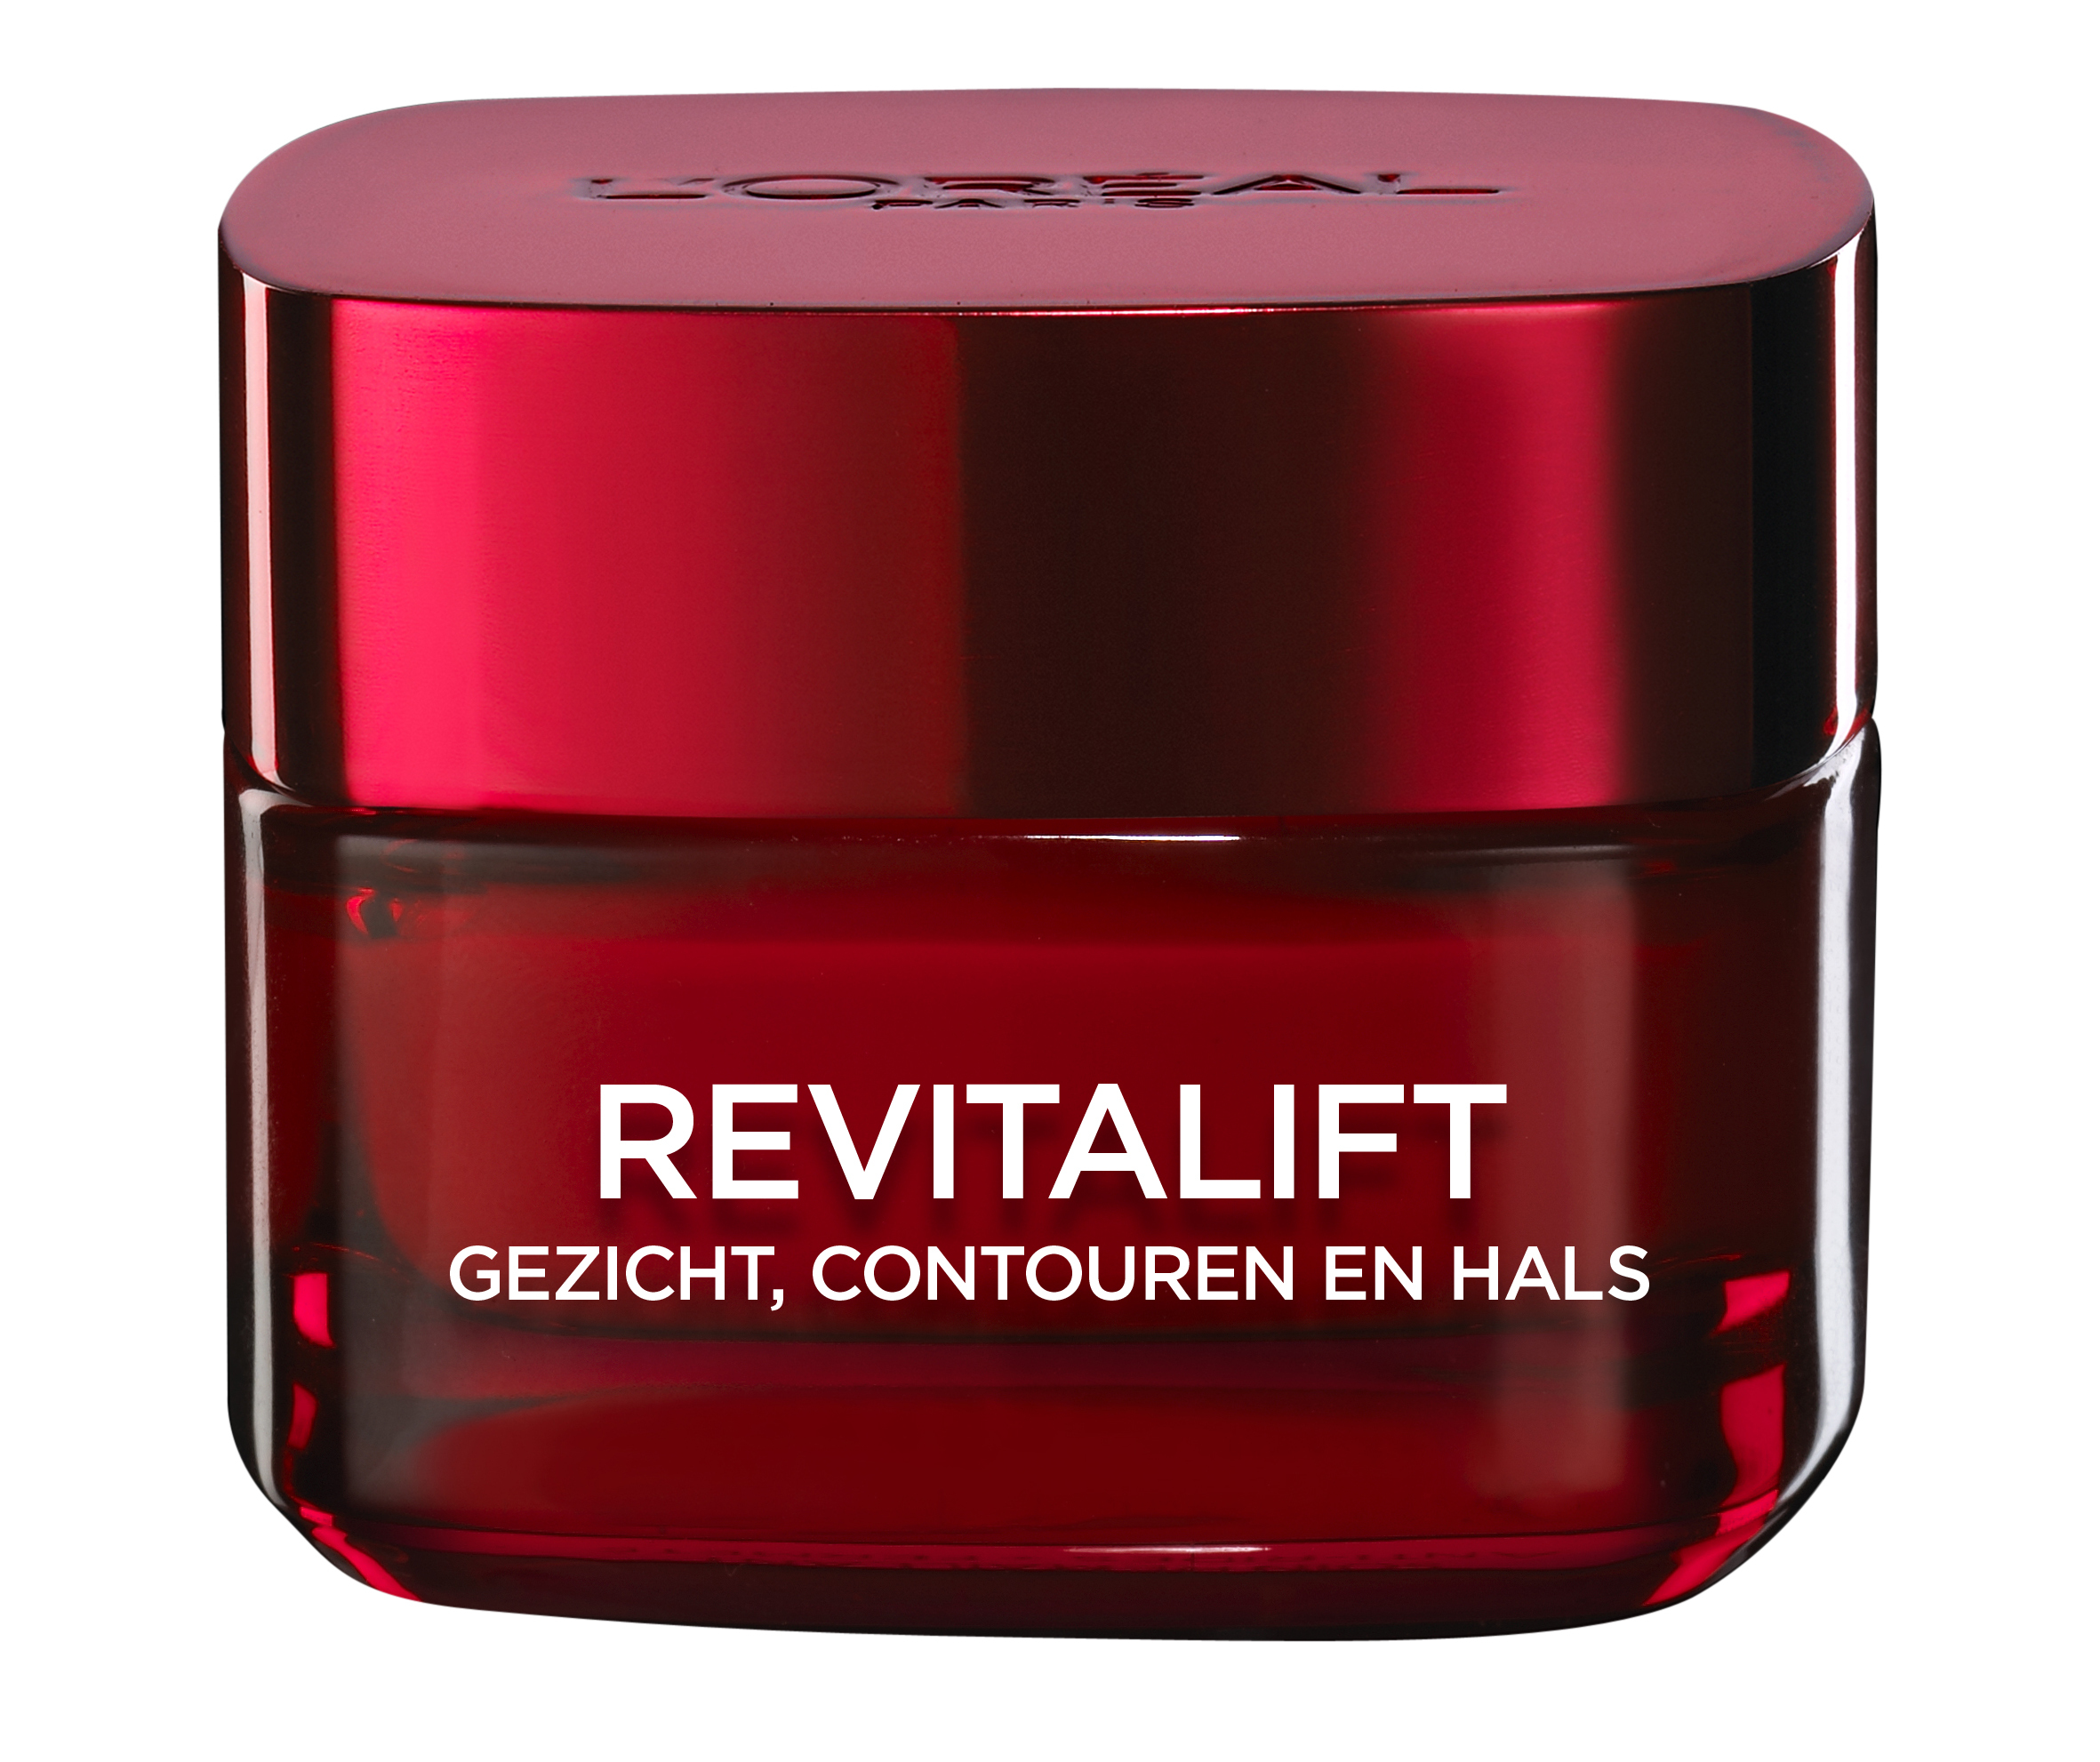 L'Oréal Skin Expert Revitalift 40+ Day Cream Firming Face, Contours and Neck 50ml